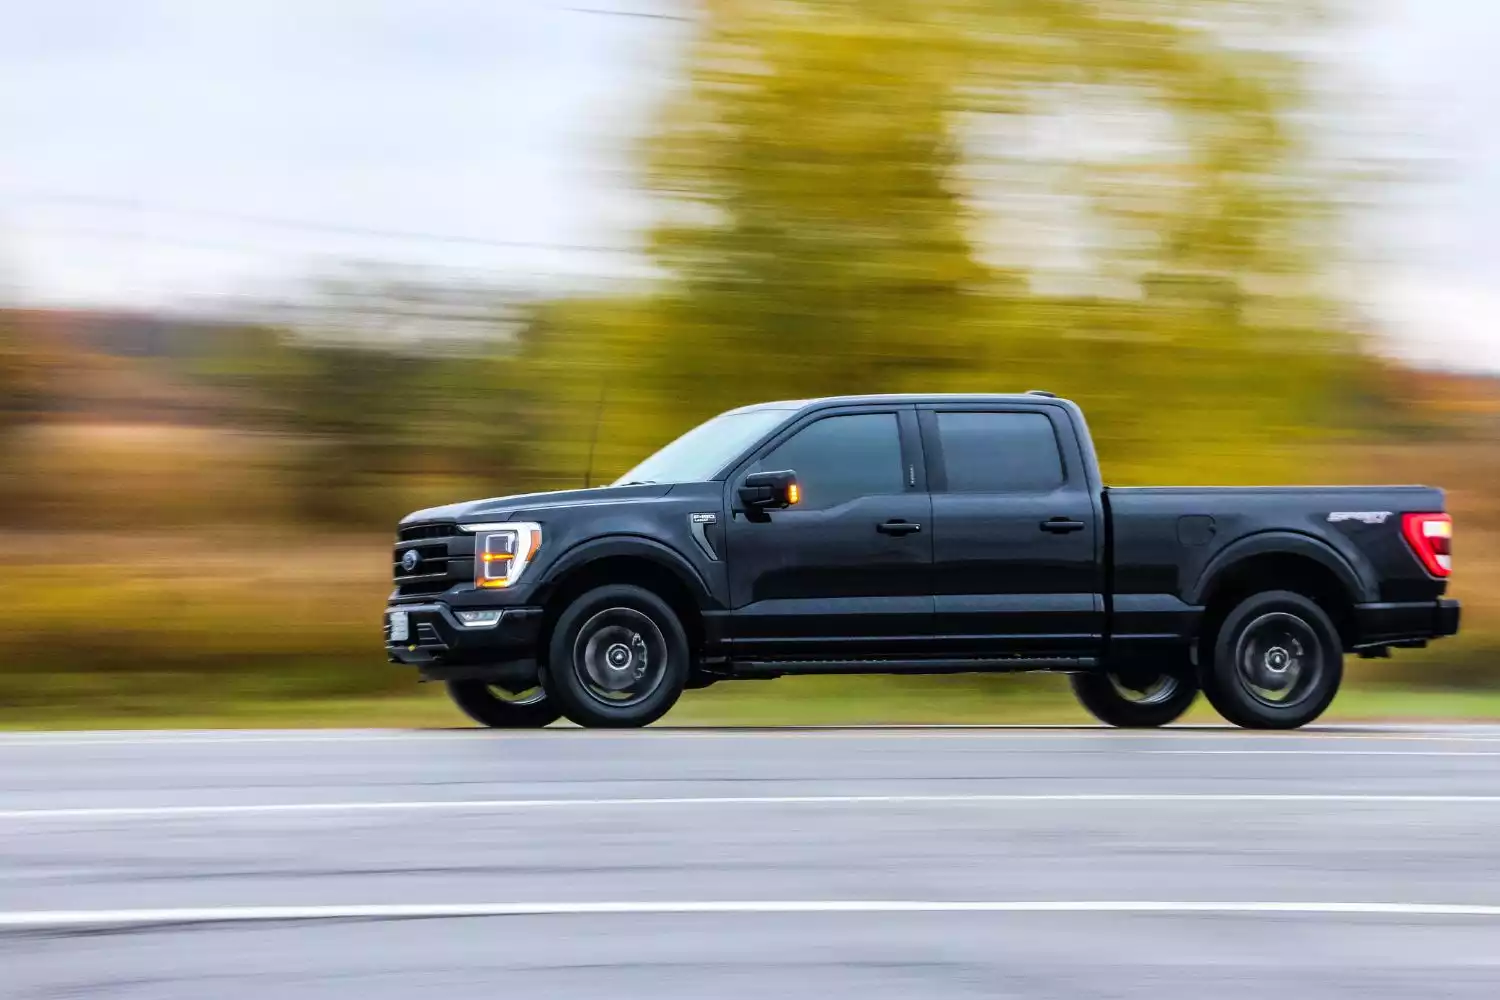 2. Ford F-150